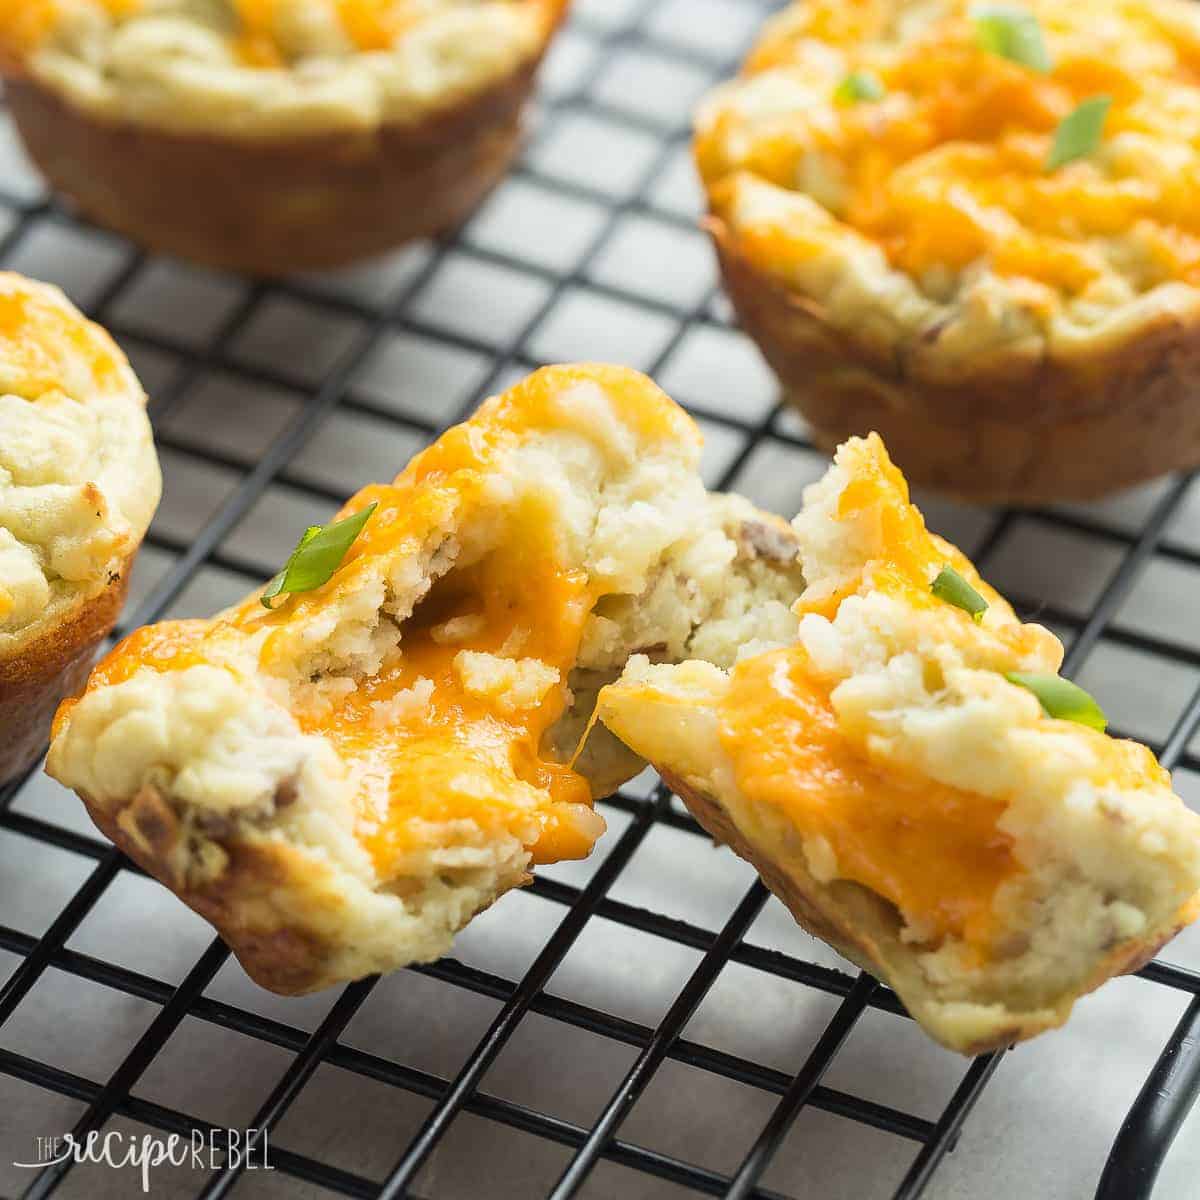 leftover mashed potato puffs broken in half to reveal cheesy center